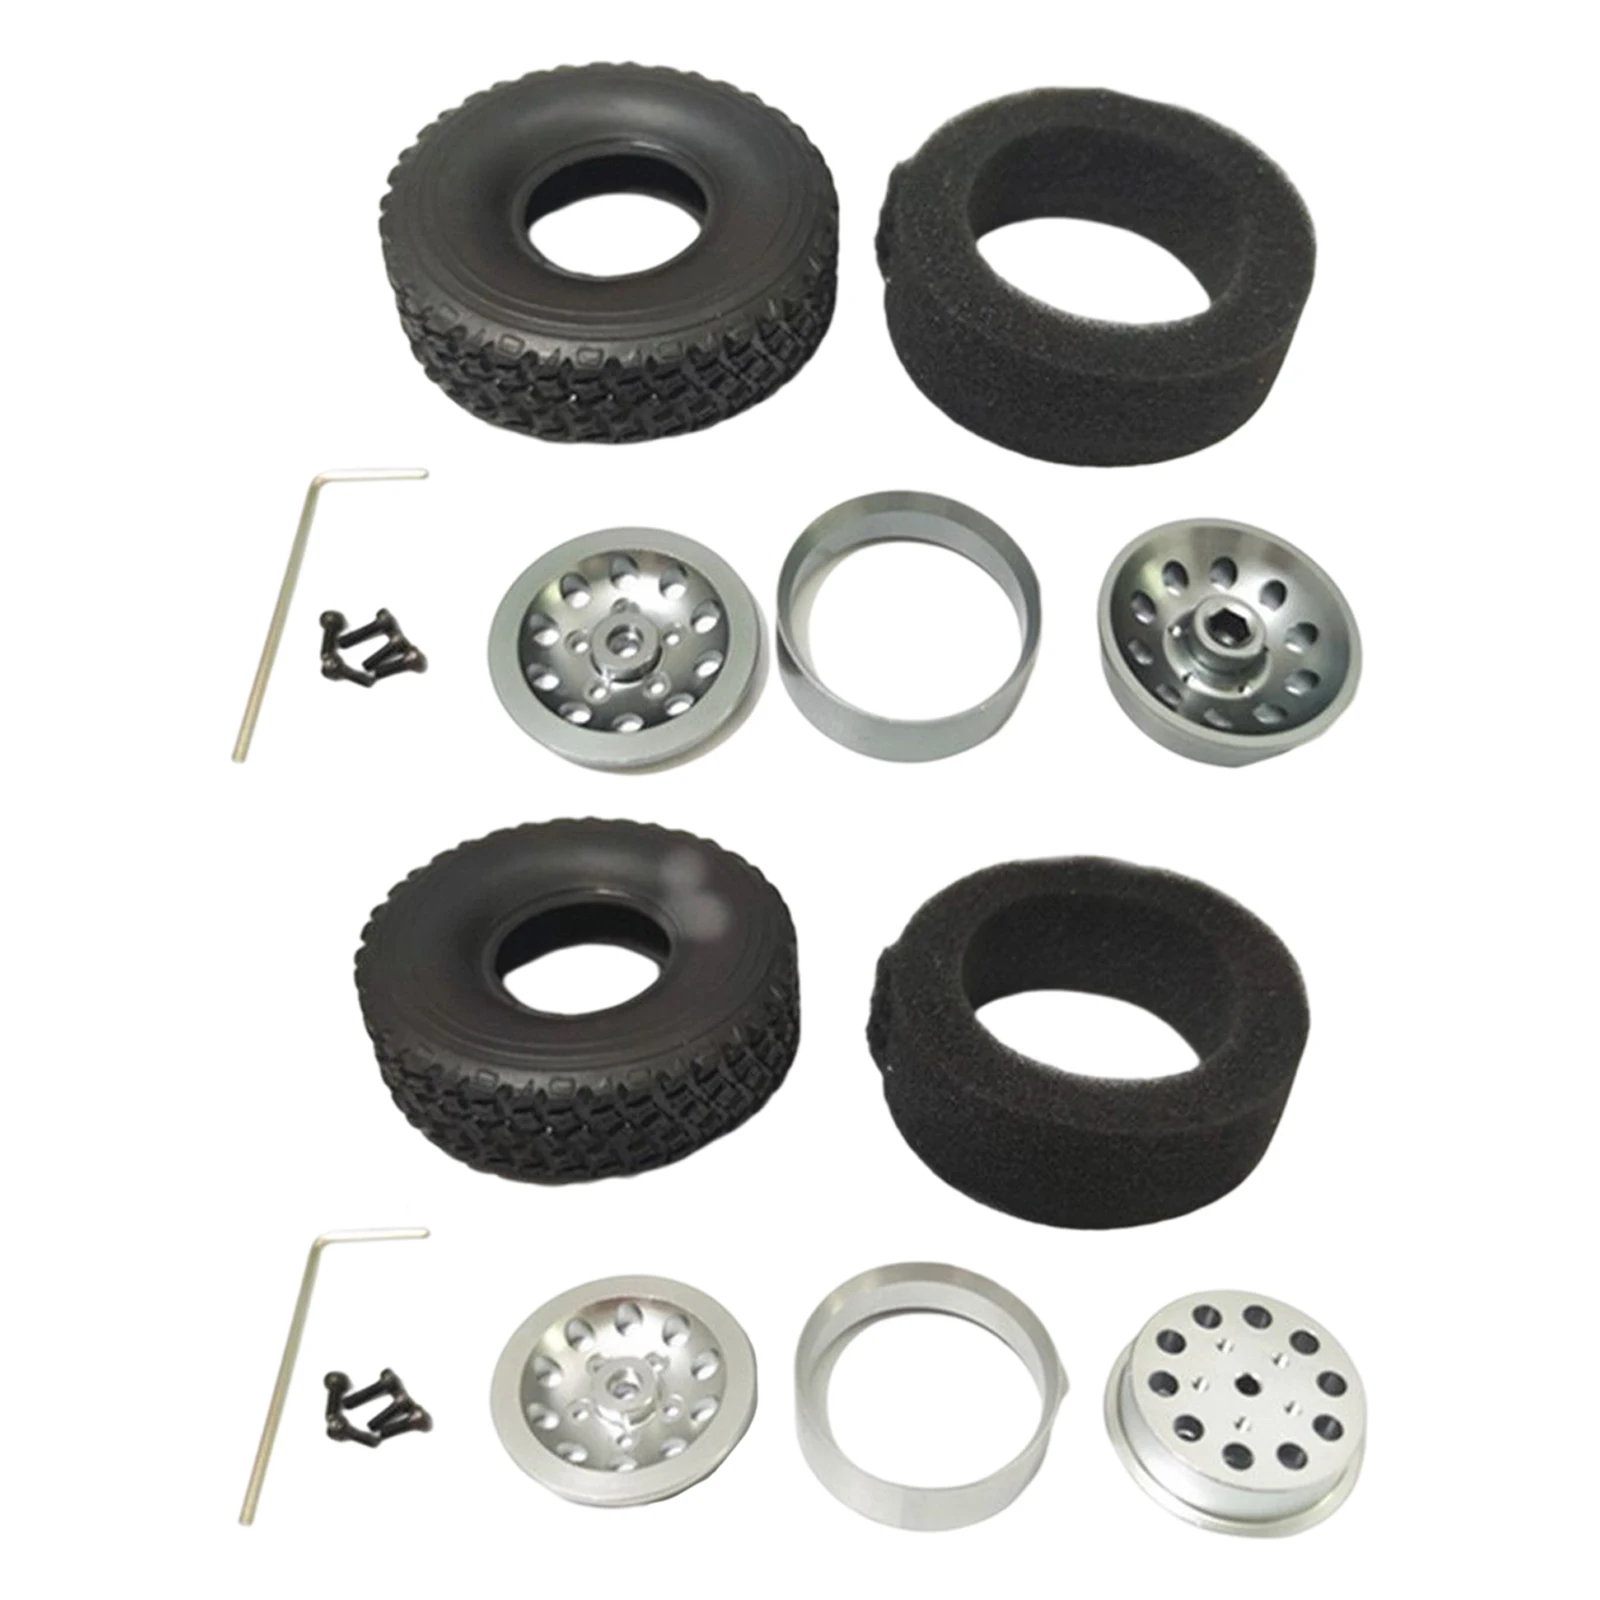 RC Car Upgrade Tire Tyres for MN D90 1/12 Hobby Model Truck Replacement Accessories